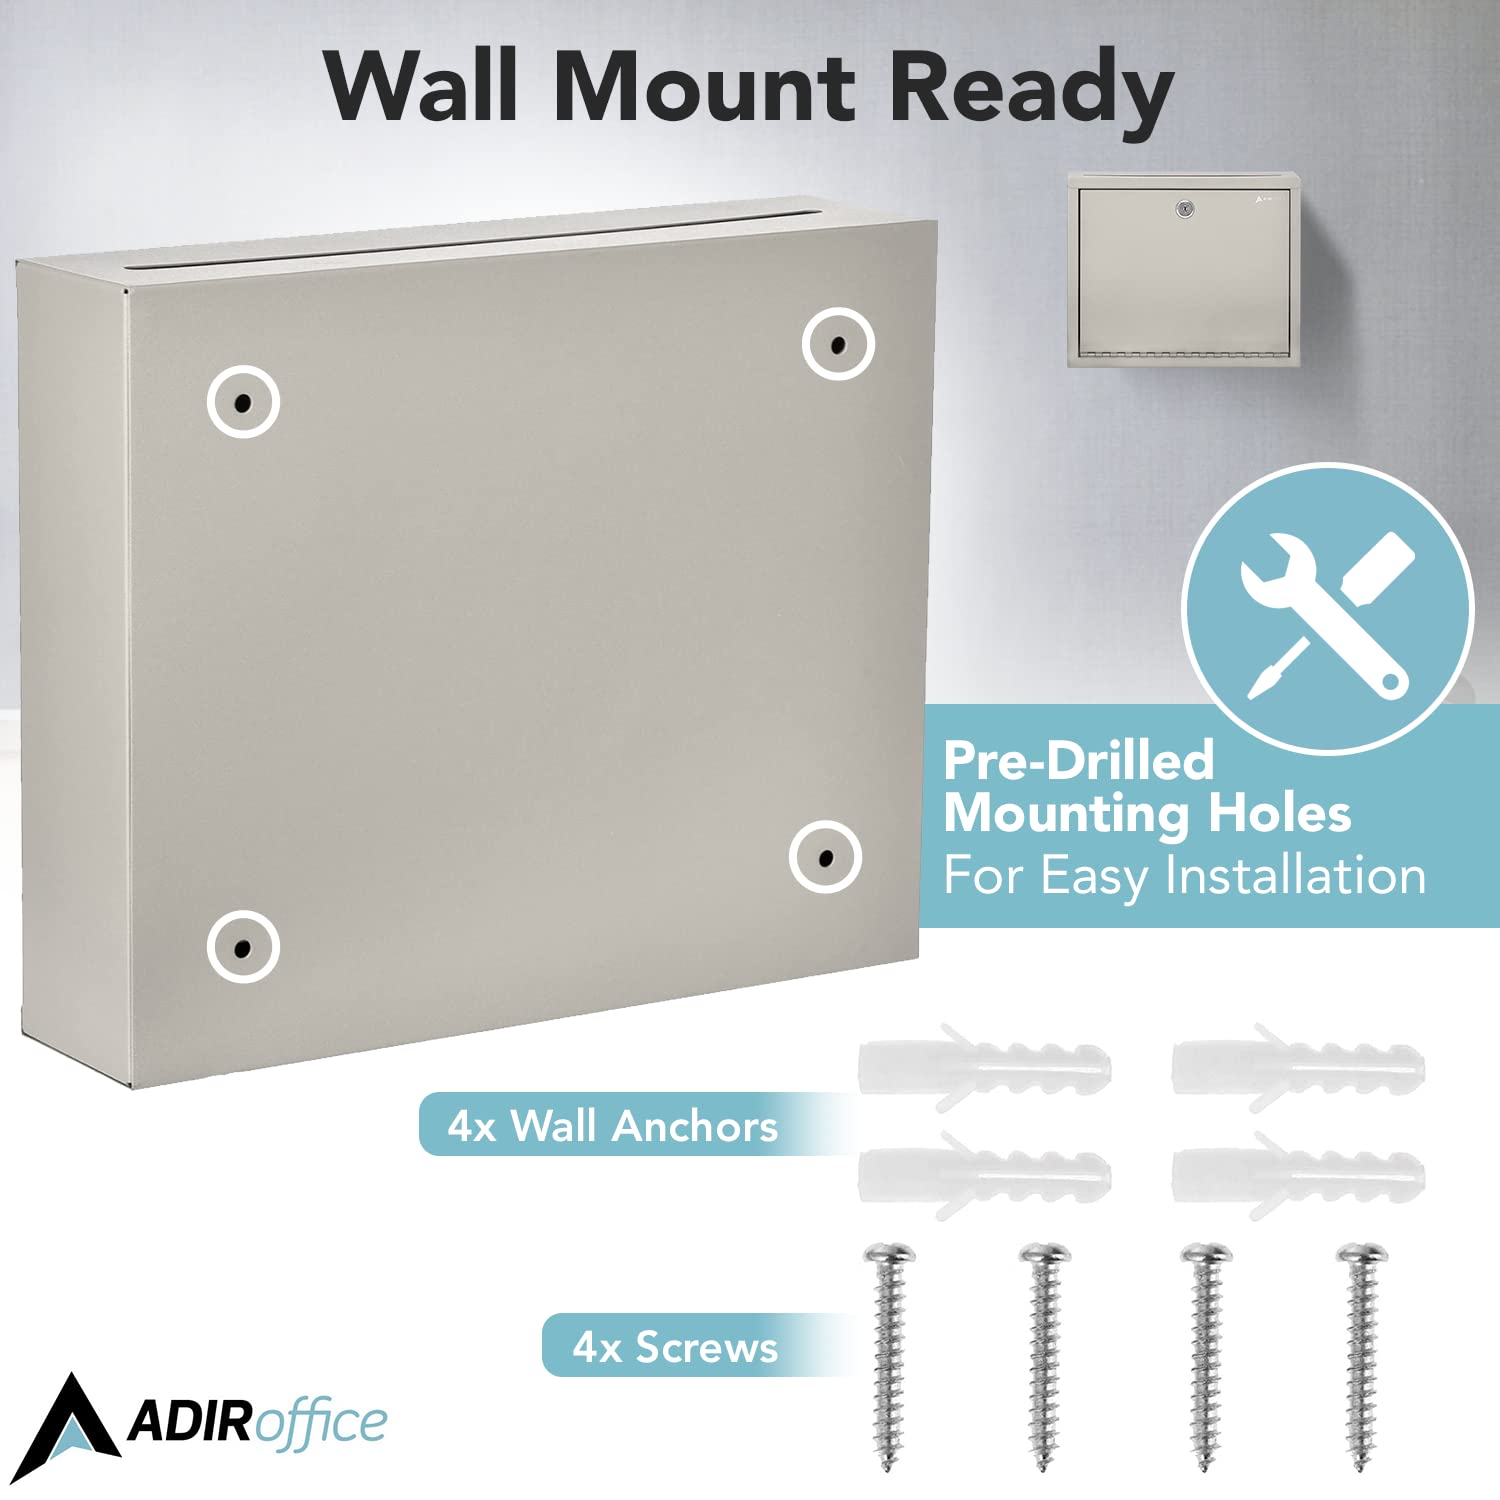 AdirOffice Multi Purpose Mail Box with Lock - Heavy Duty Drop Box - Commercial Suggestion Box -Wall Mountable Safe and Secure Ballot Box Variation  - Like New